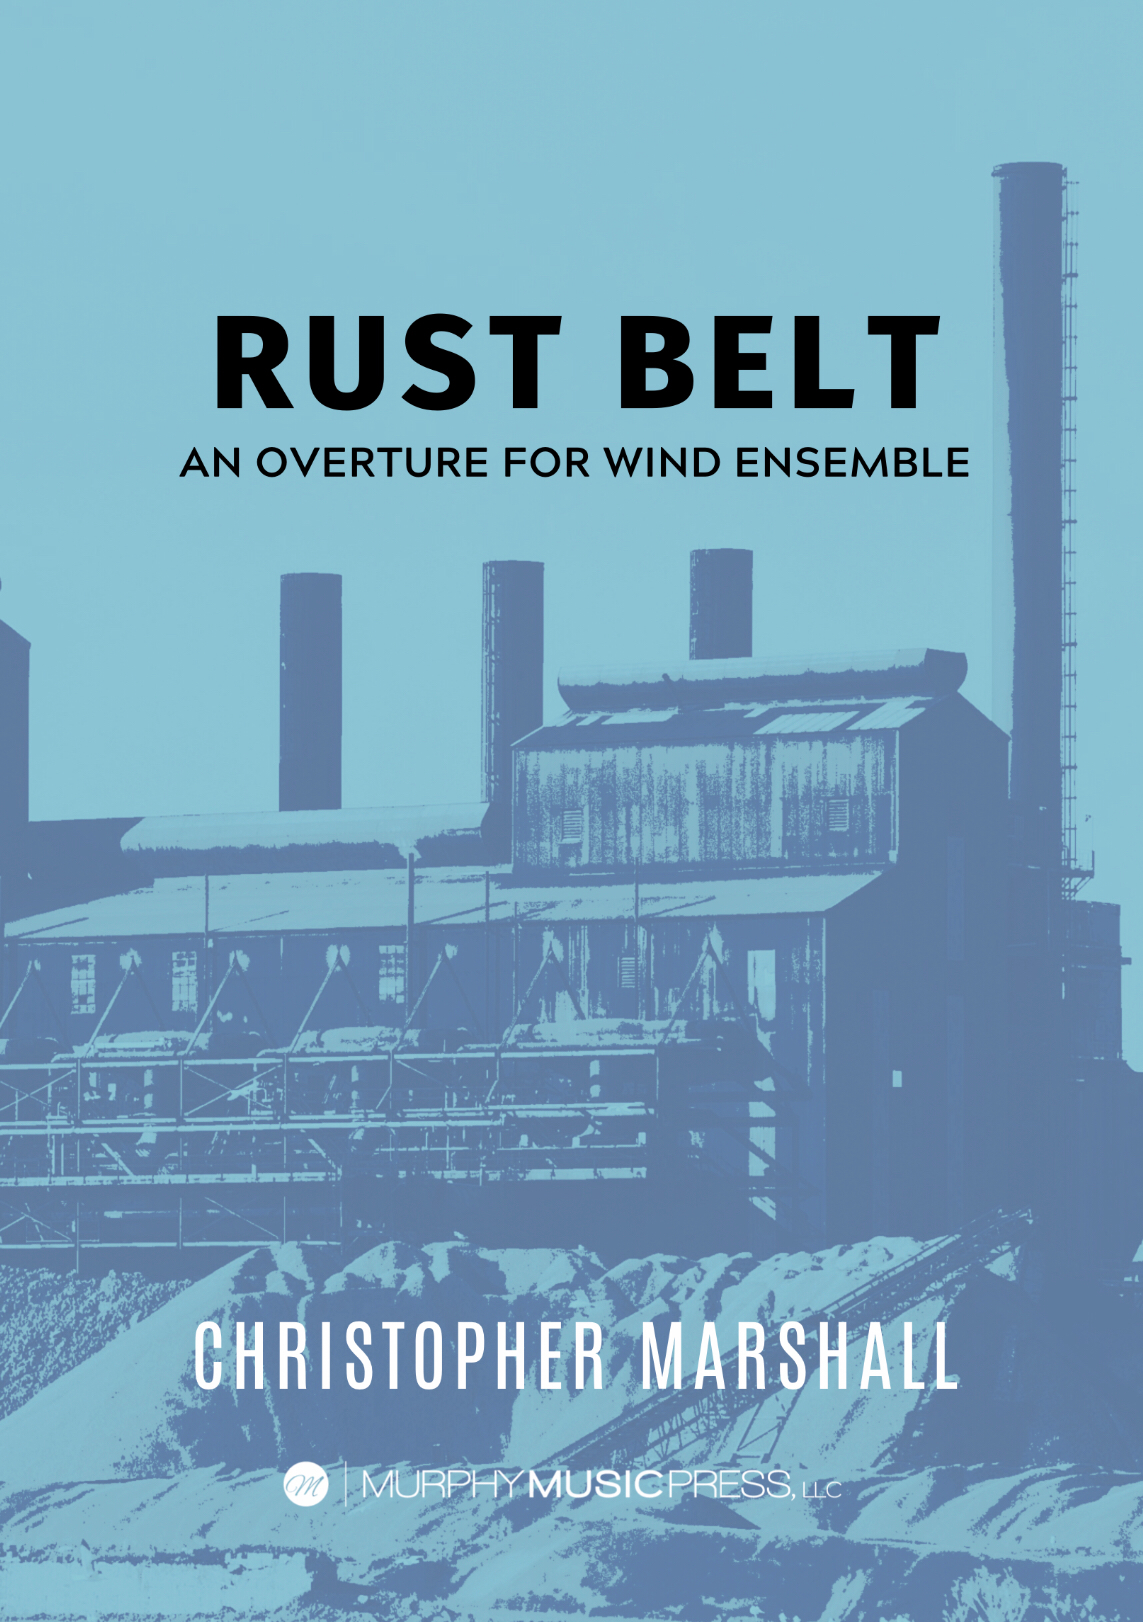 Rust Belt by Christopher Marshall